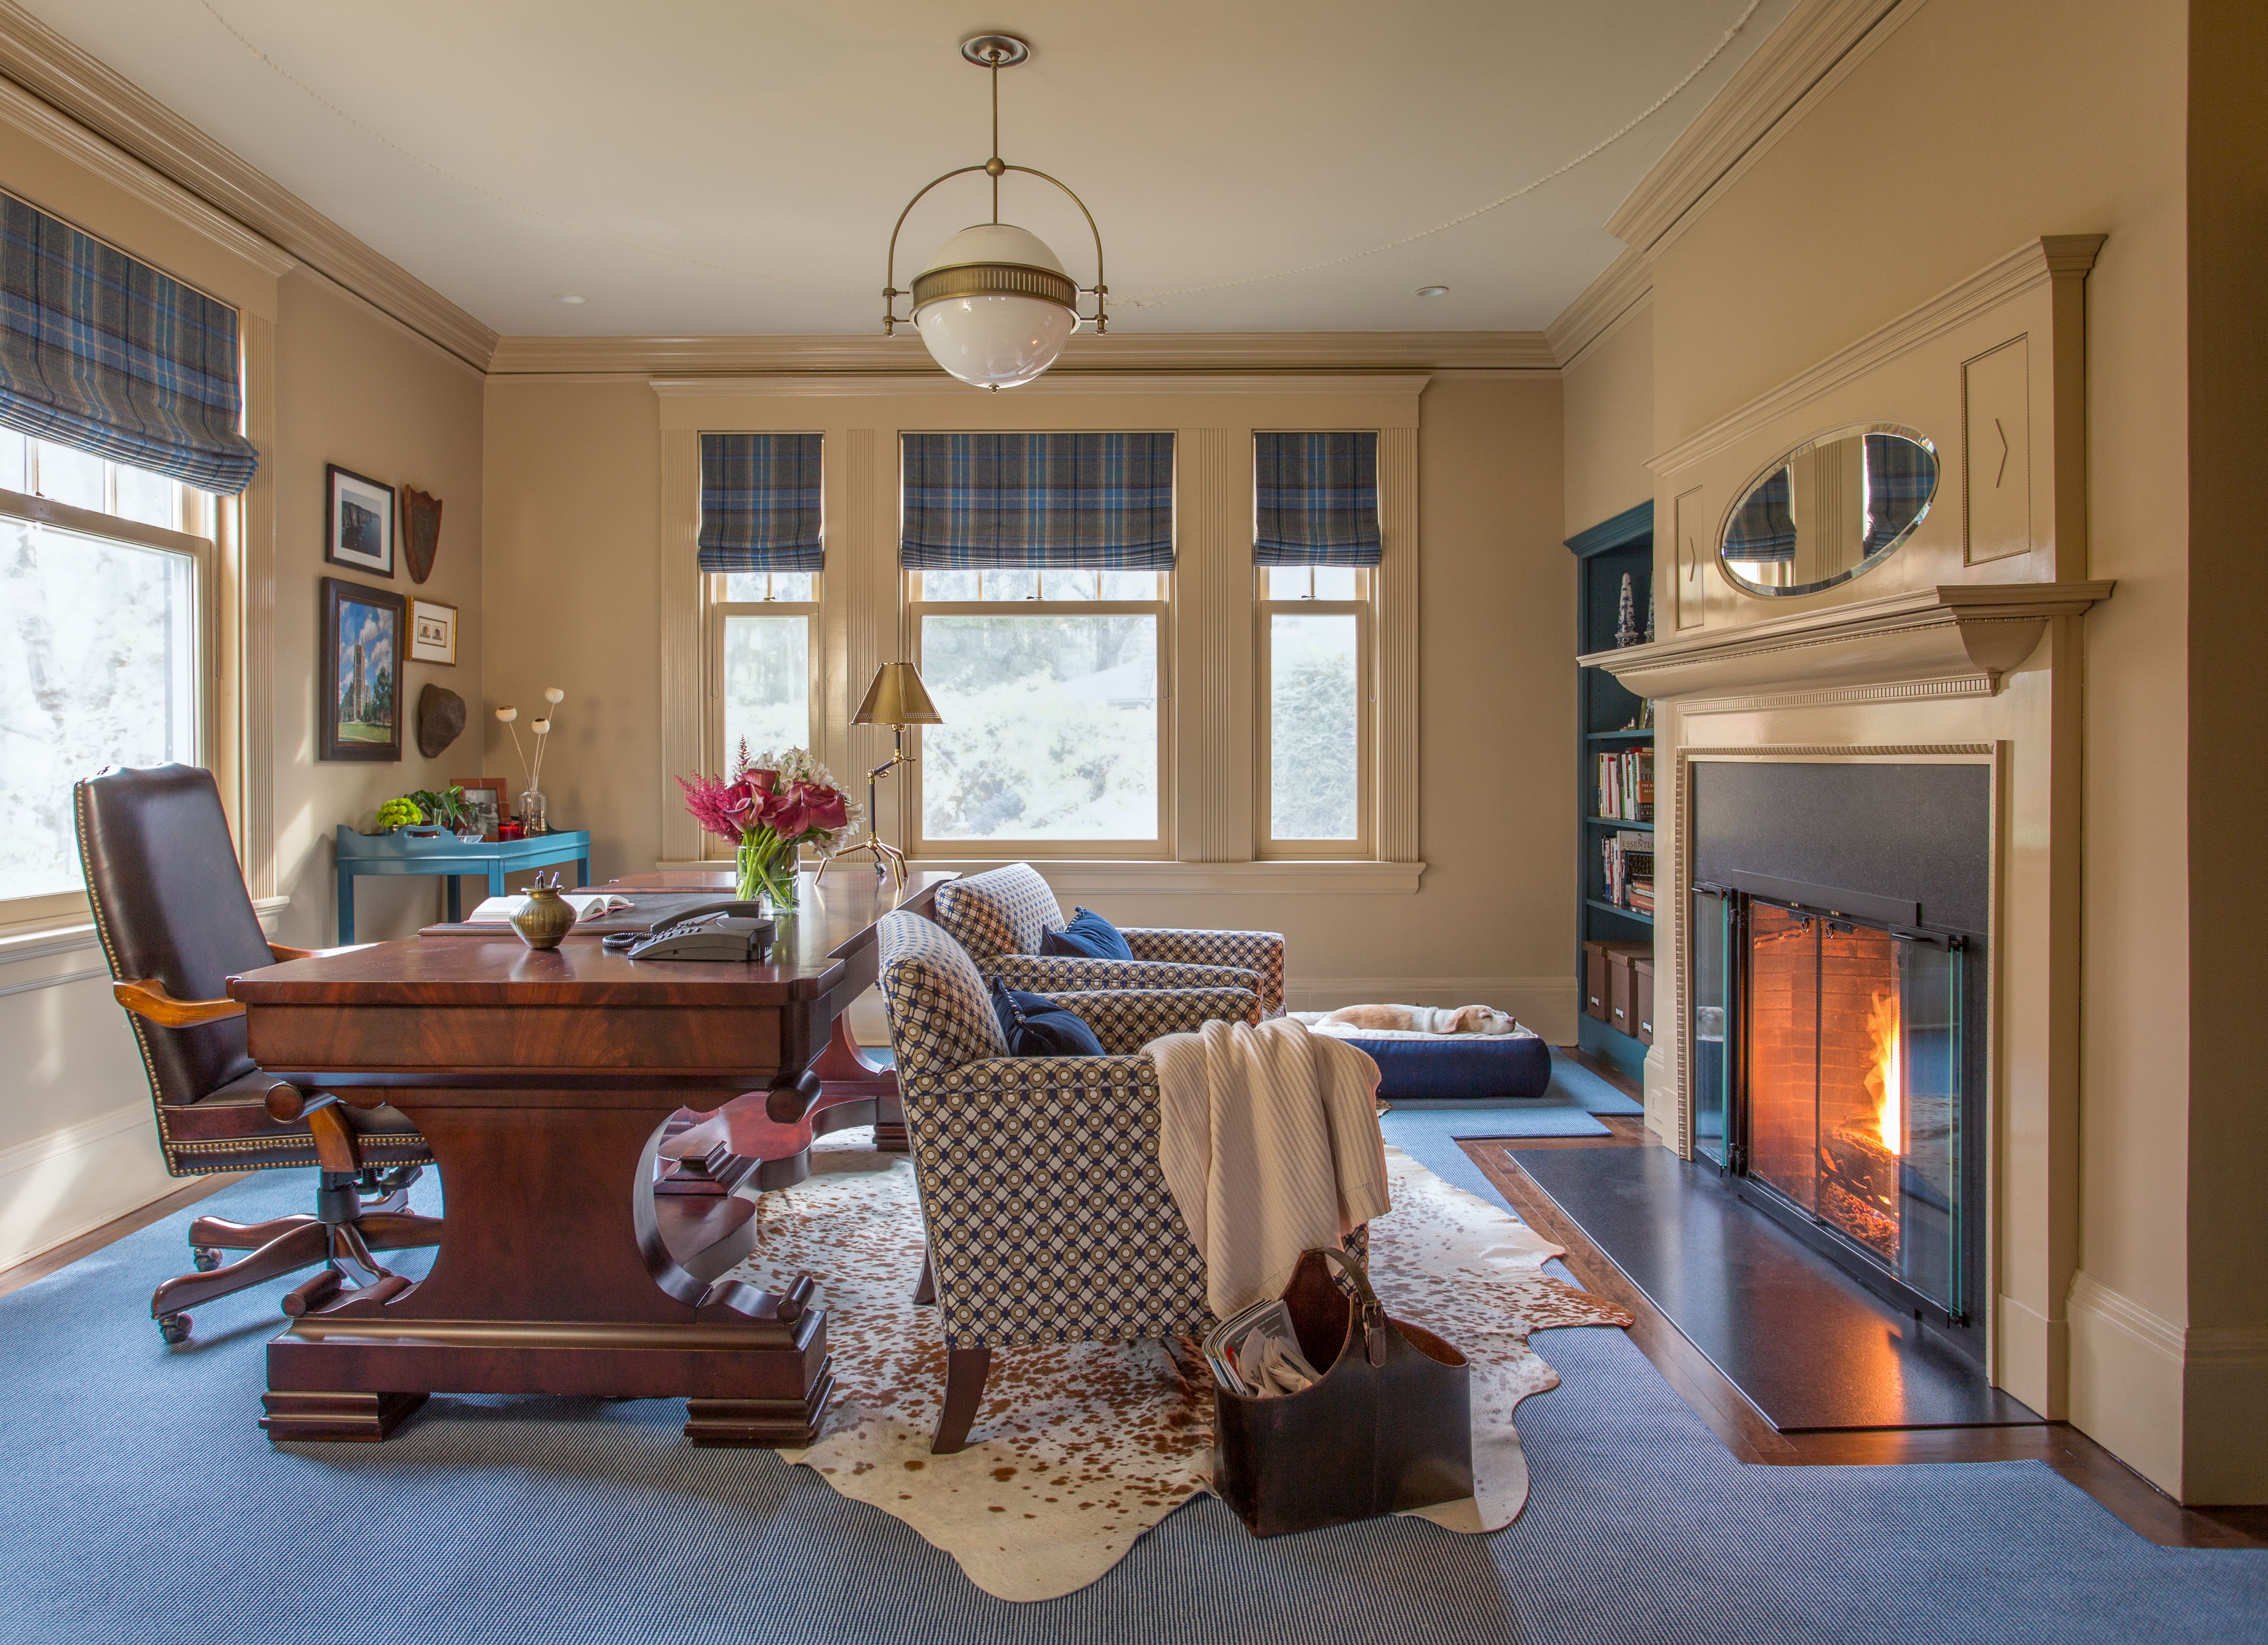 One Room Challenge Fall 2015 Manbrary Reveal | Kelly Rogers Interiors | Interiors for Families